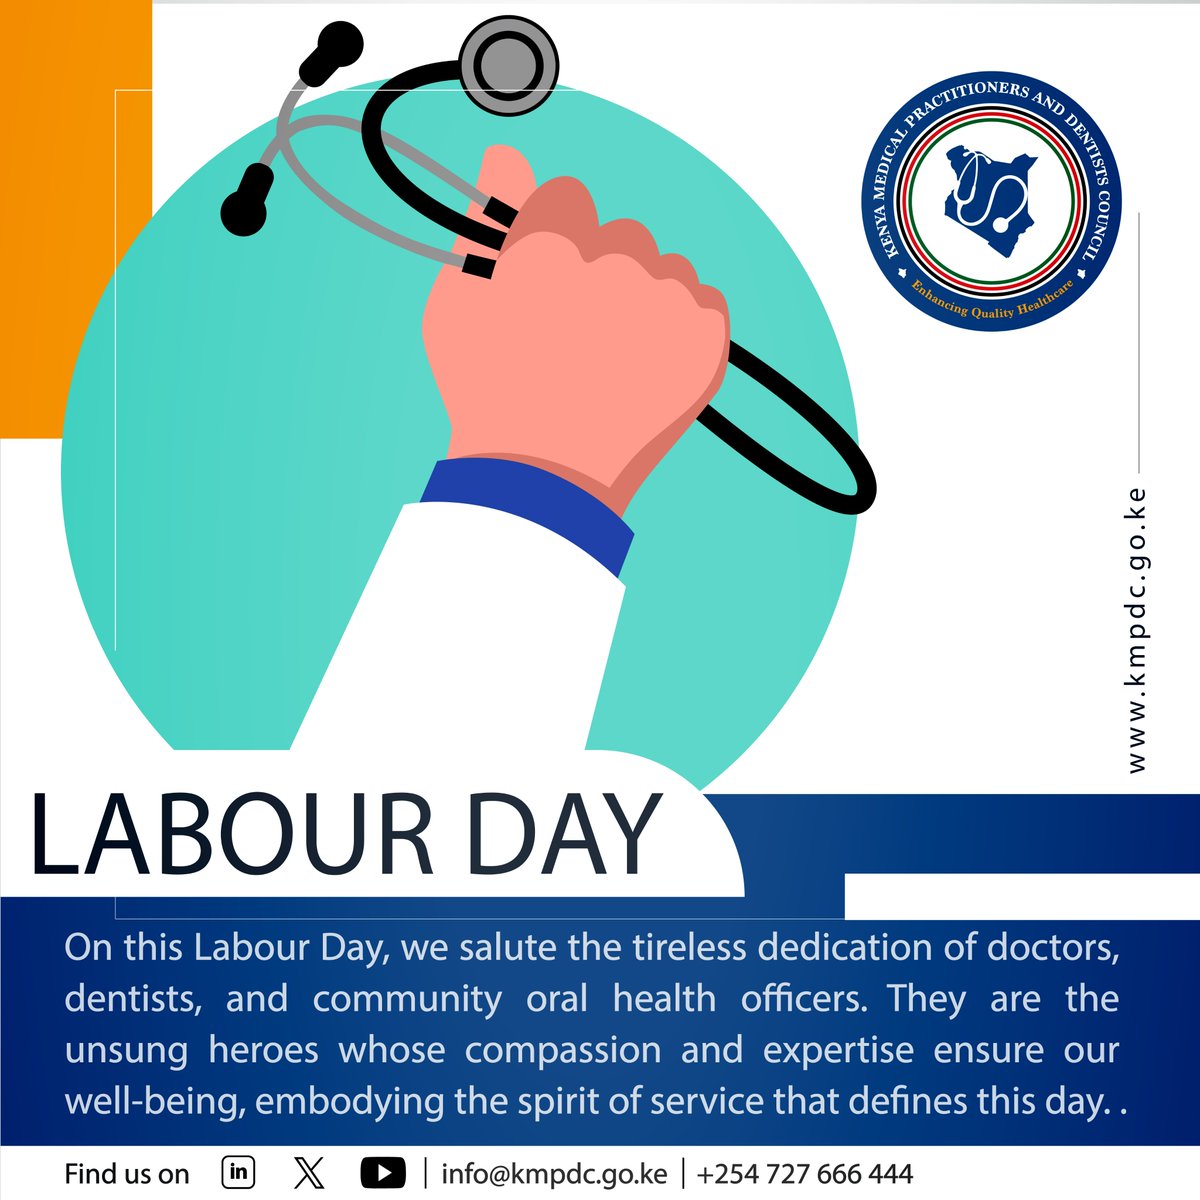 On this Labor Day, we salute the tireless dedication of doctors, dentists, and community oral health officers. They are the unsung heroes whose compassion and expertise ensure our well-being, embodying the spirit of service that defines this day. Thank you for your invaluable…